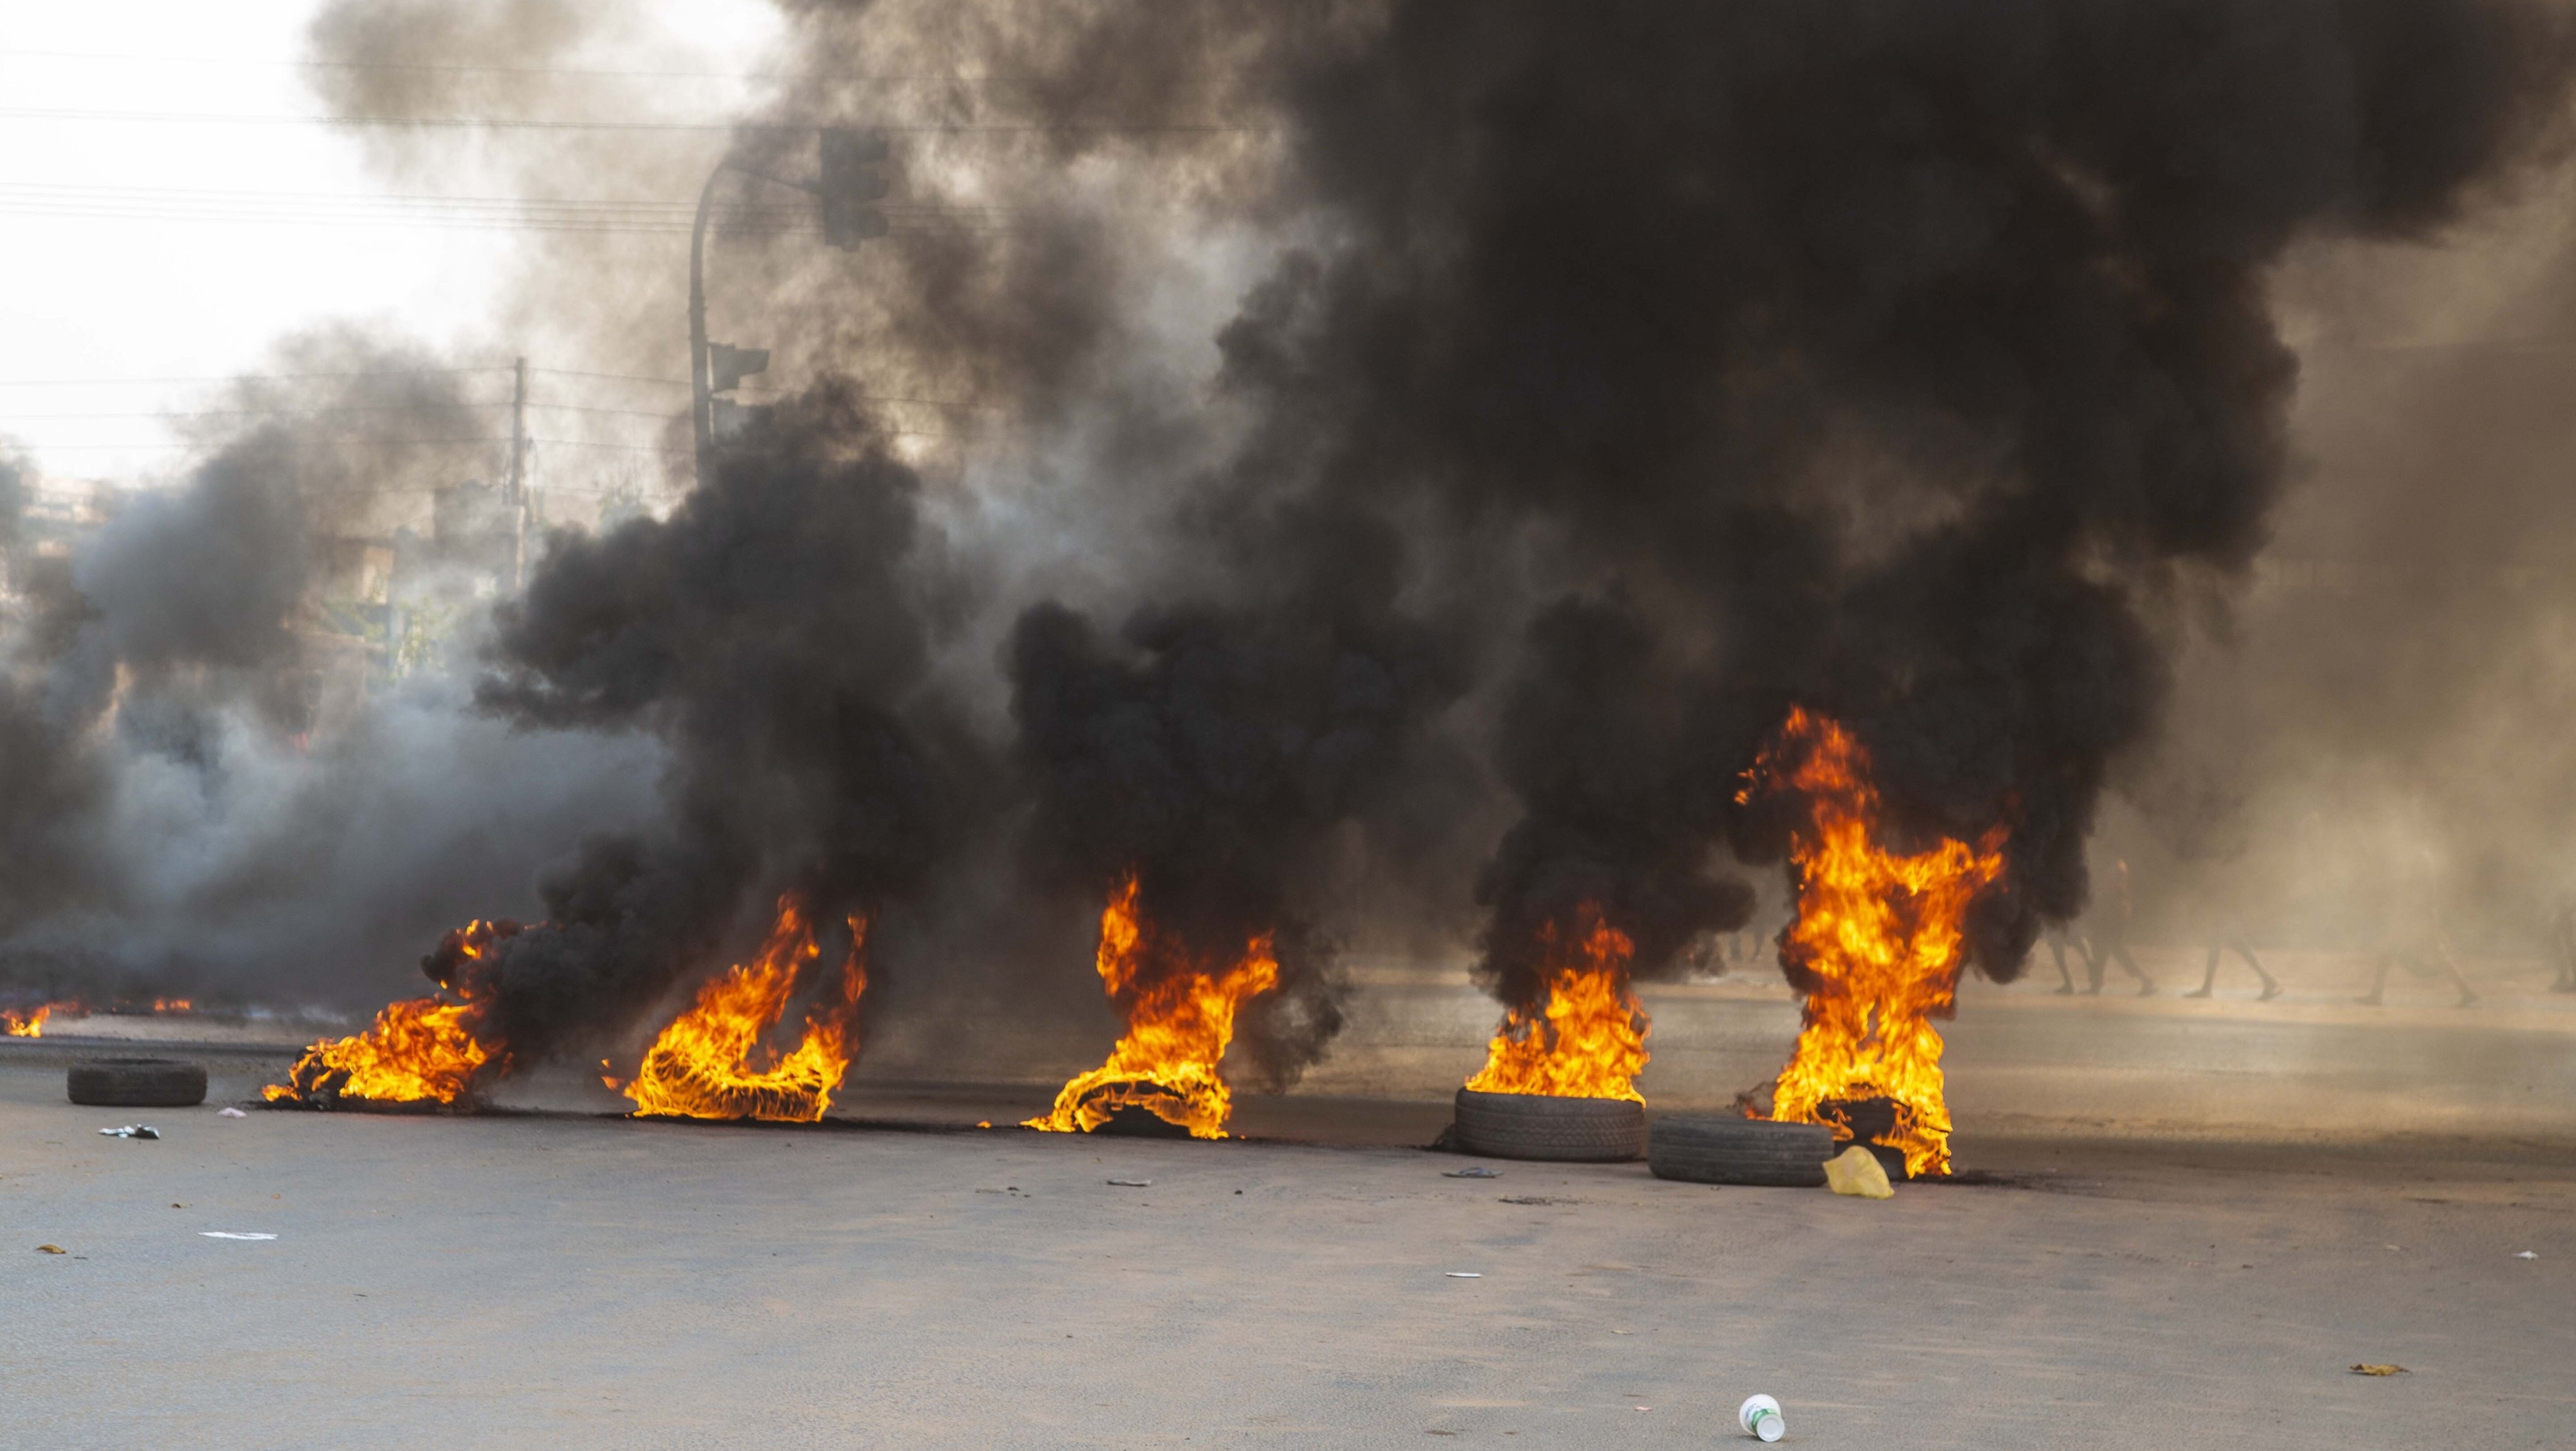 Protests in Sudan amid âcoupâ reports